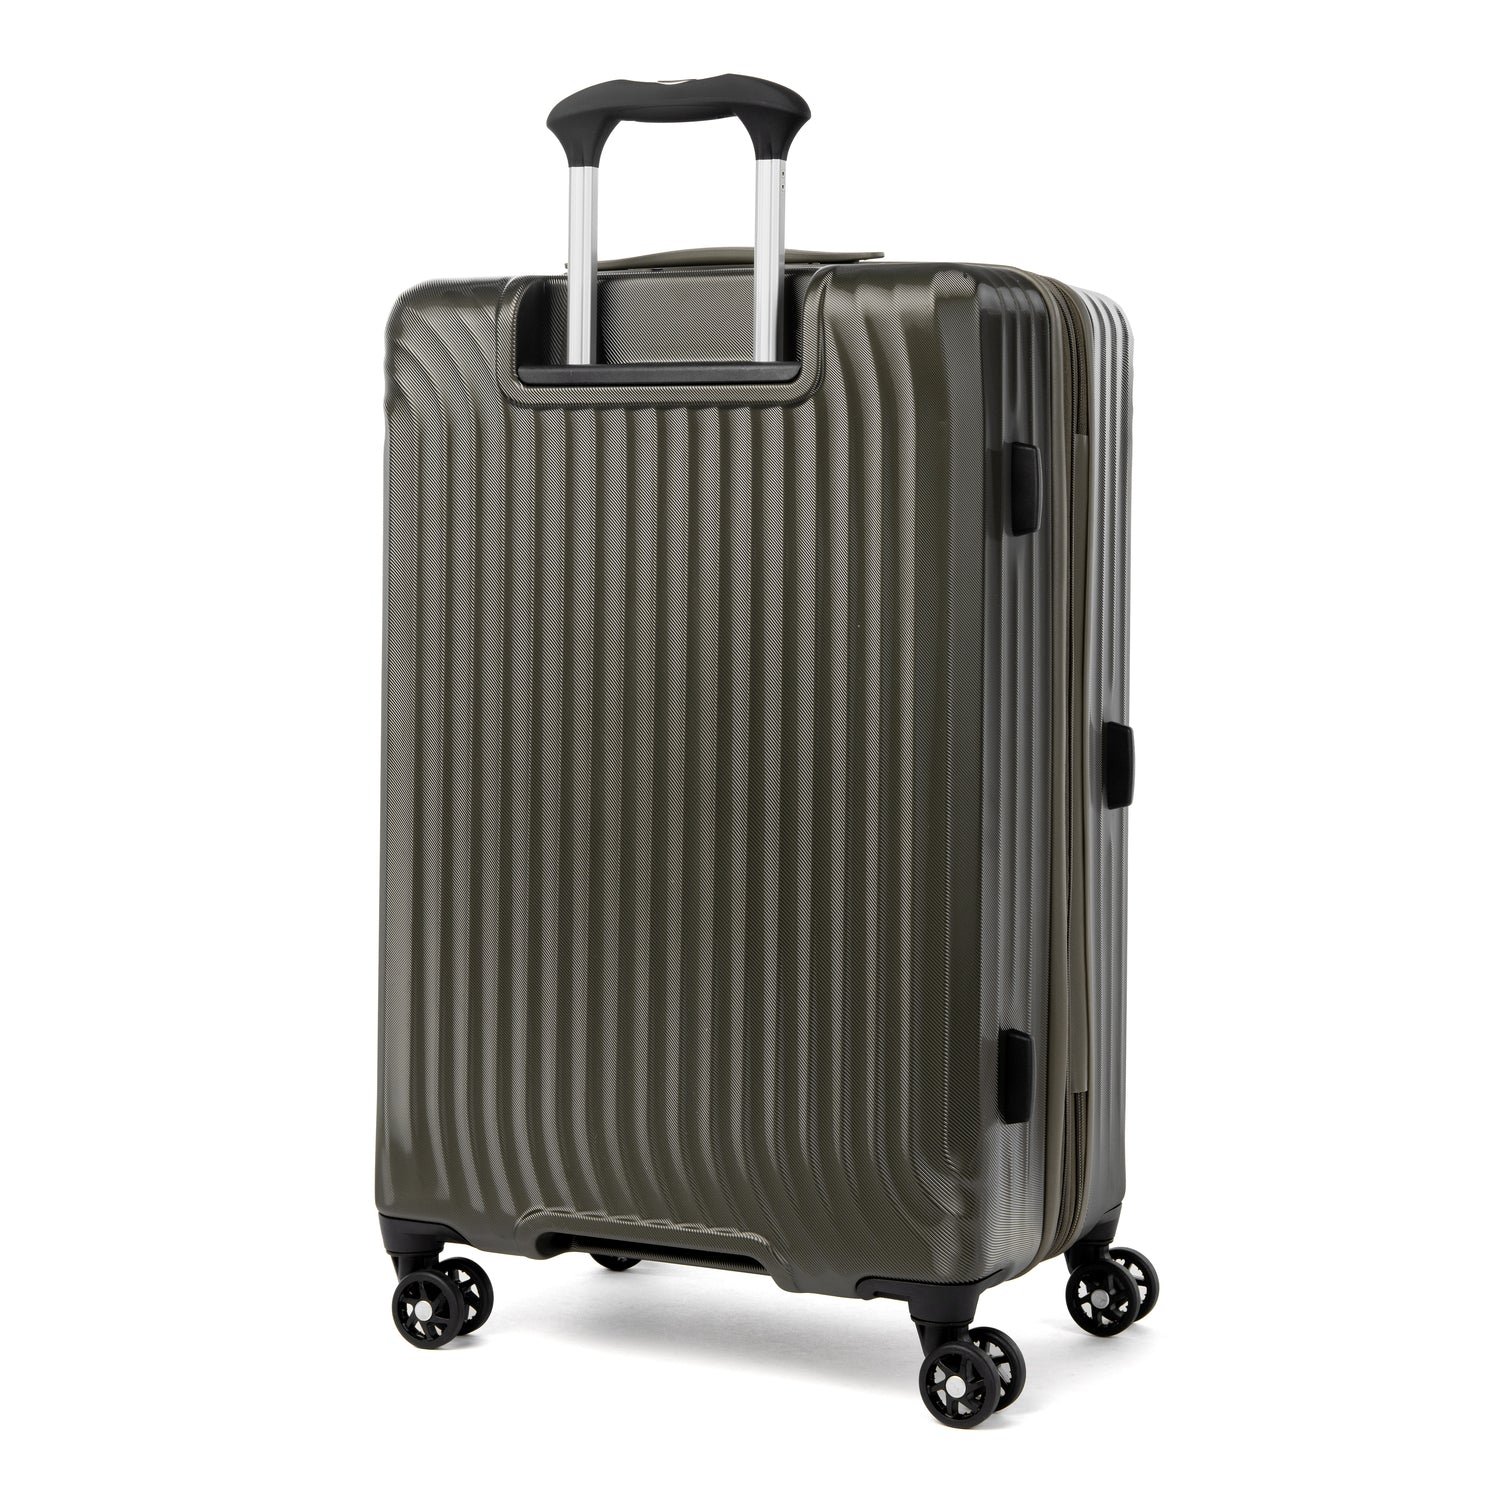 Travelpro Maxlite Air Medium Check-in Expandable Hardside Spinner Luggage